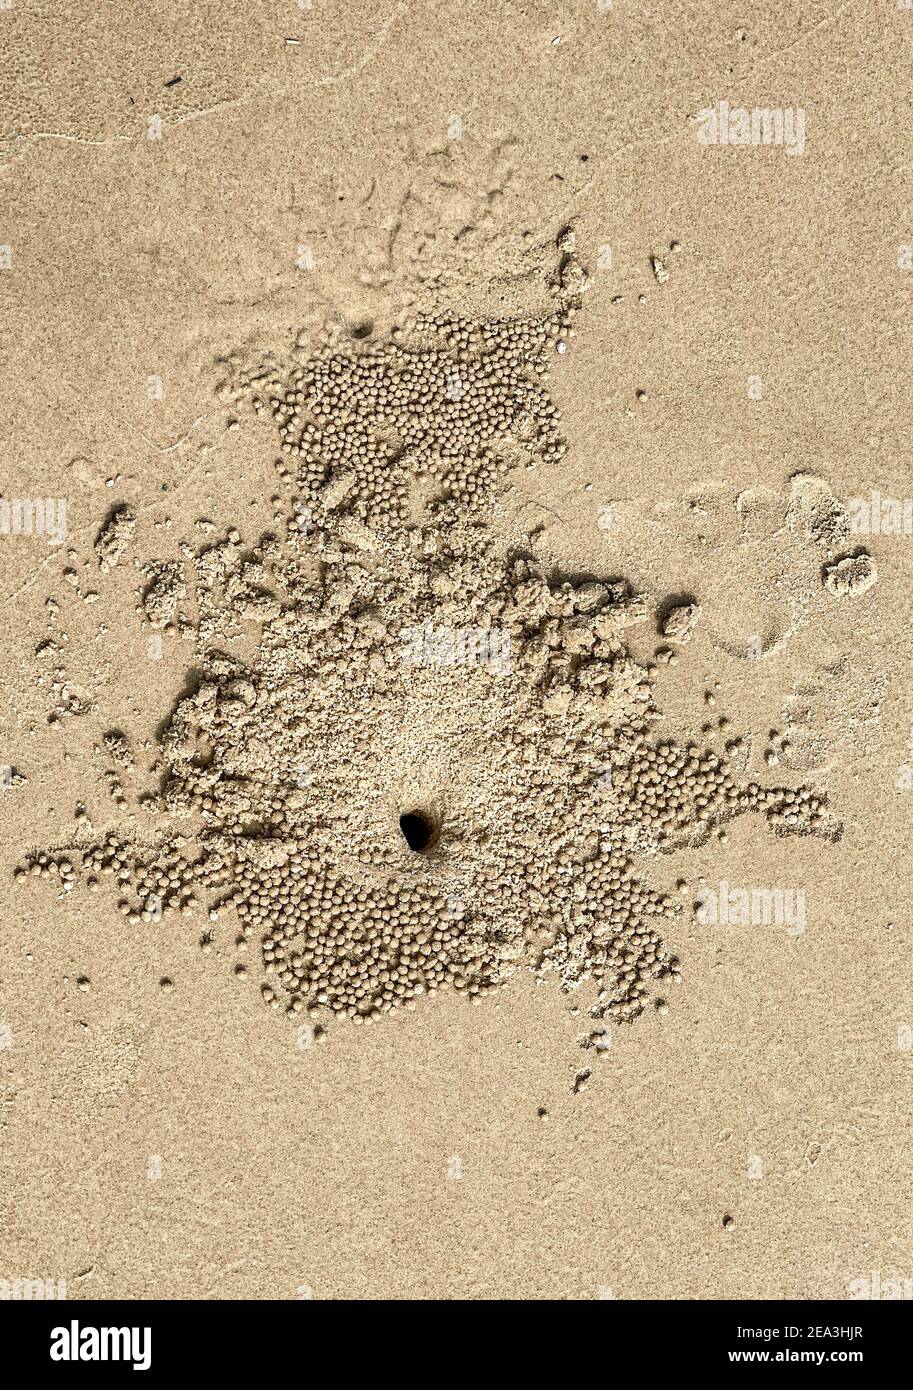 Sand balls made by the sand bubbler crabs, Scopimera globose, widespread across the Indo-Pacific region on sandy beaches. Stock Photo